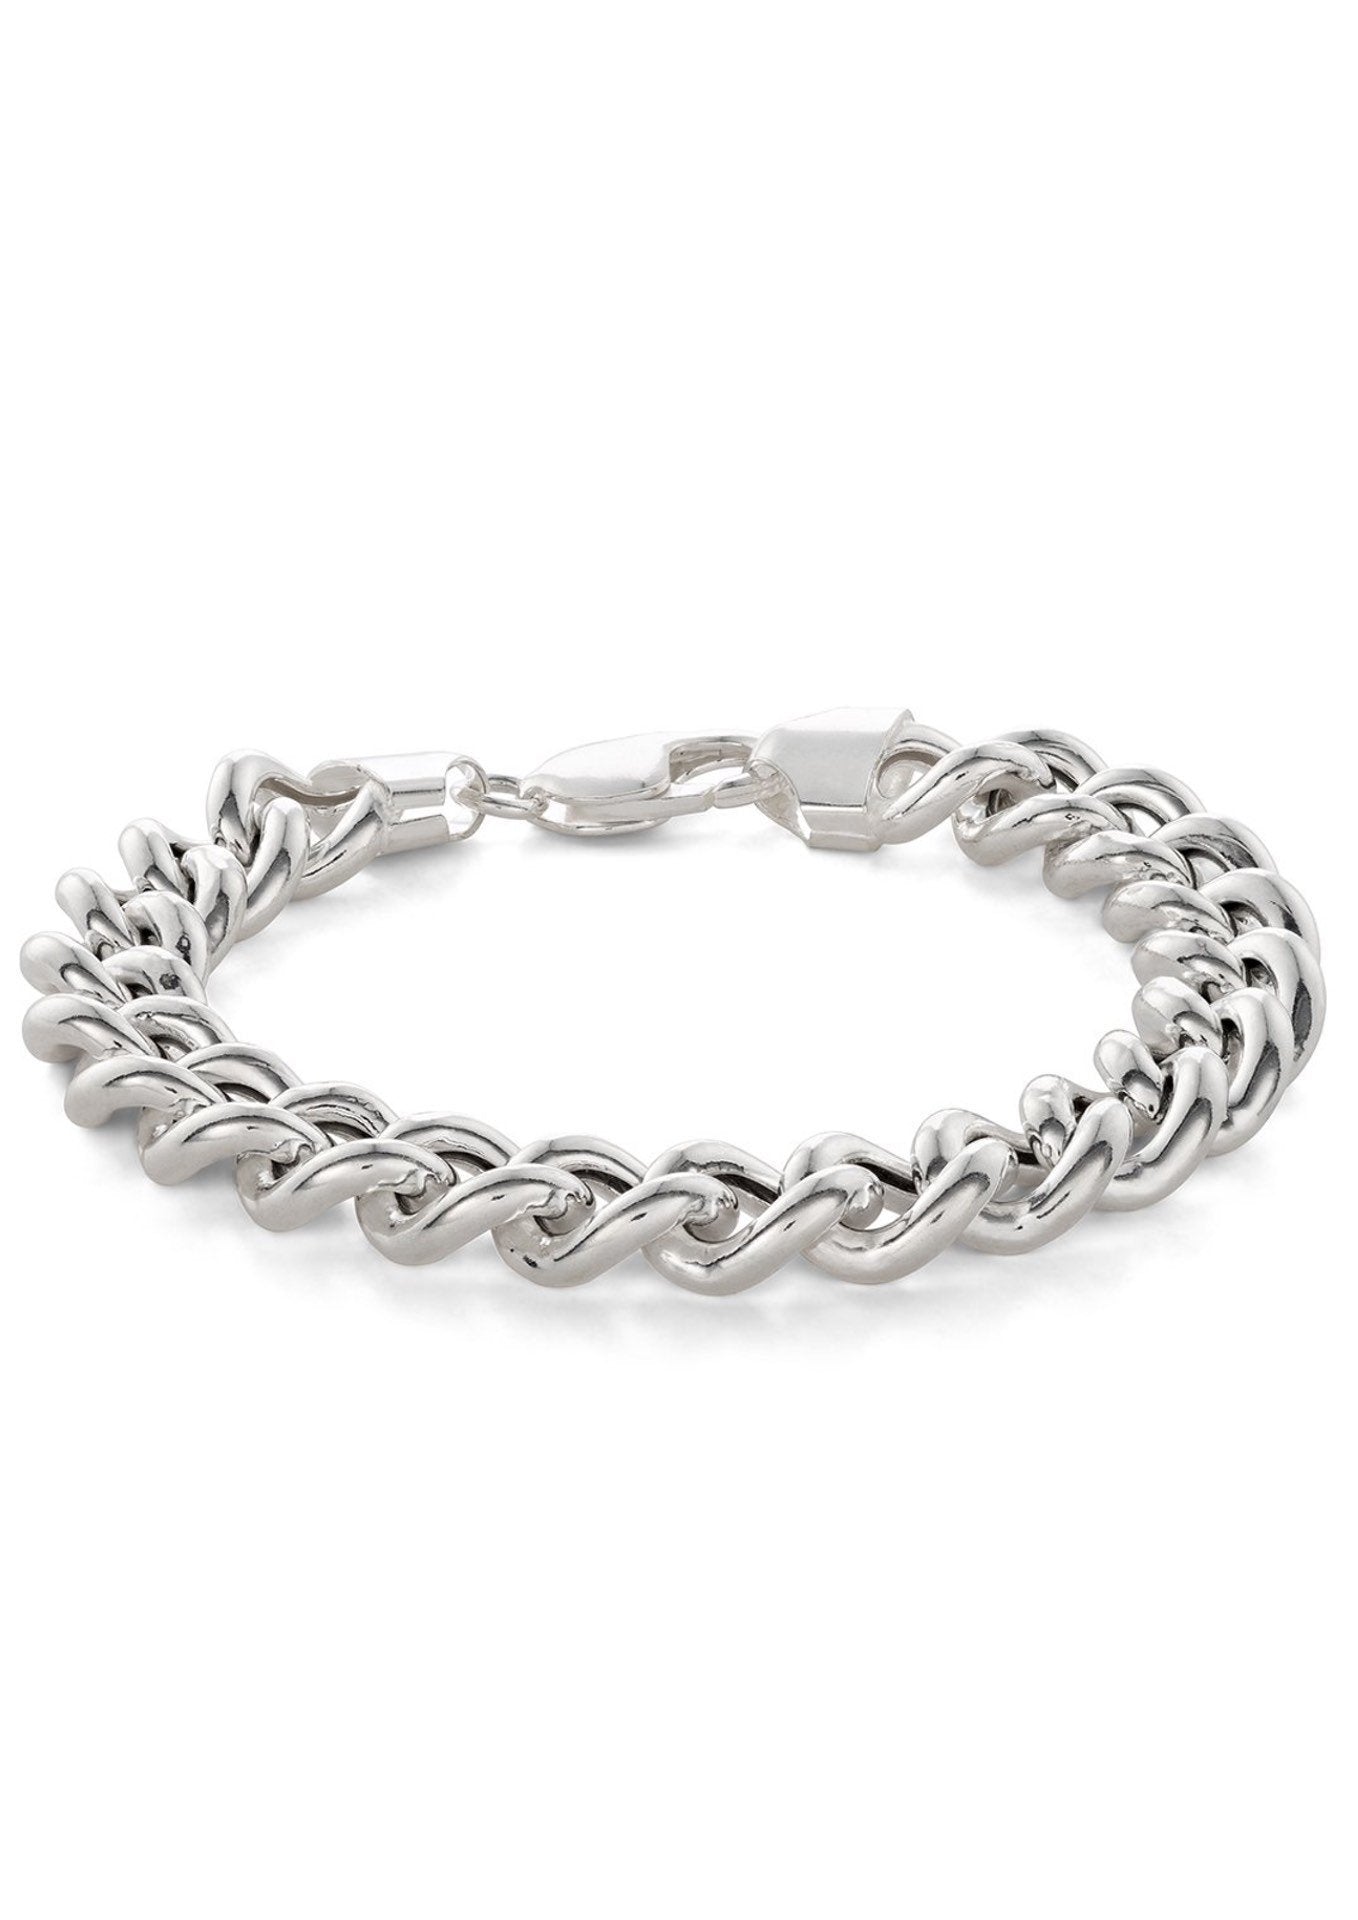 NO MORE accessories Anchor Chain Bracelet in Sterling Silver for men